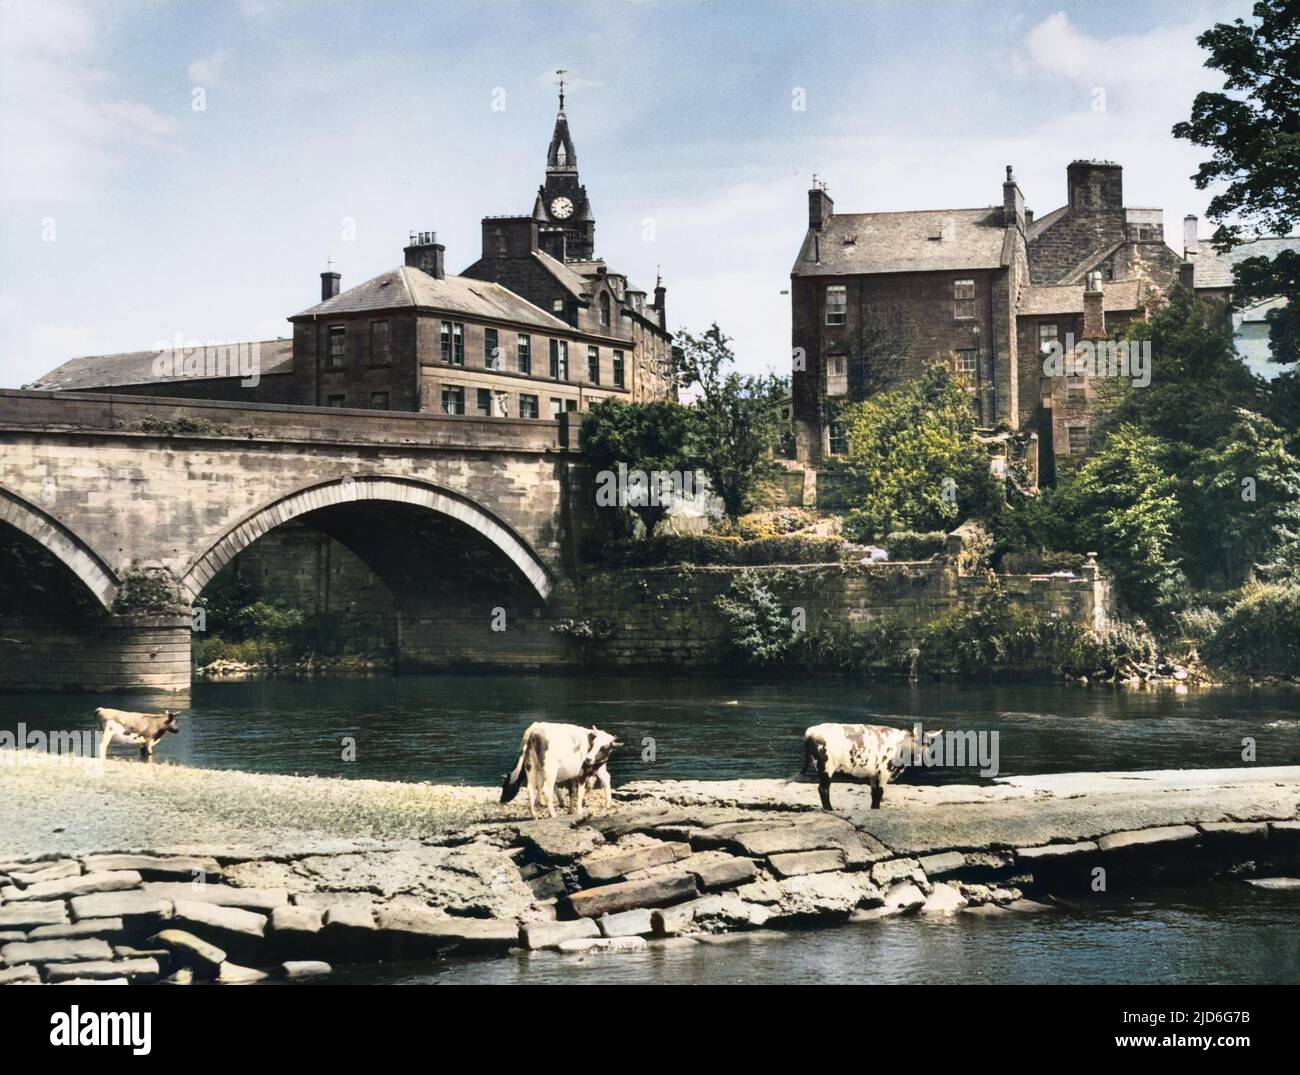 A glimpse of Annan, Dumfries-shire, Scotland, from across the River Annan. Colourised version of : 10173447       Date: 1950s Stock Photo